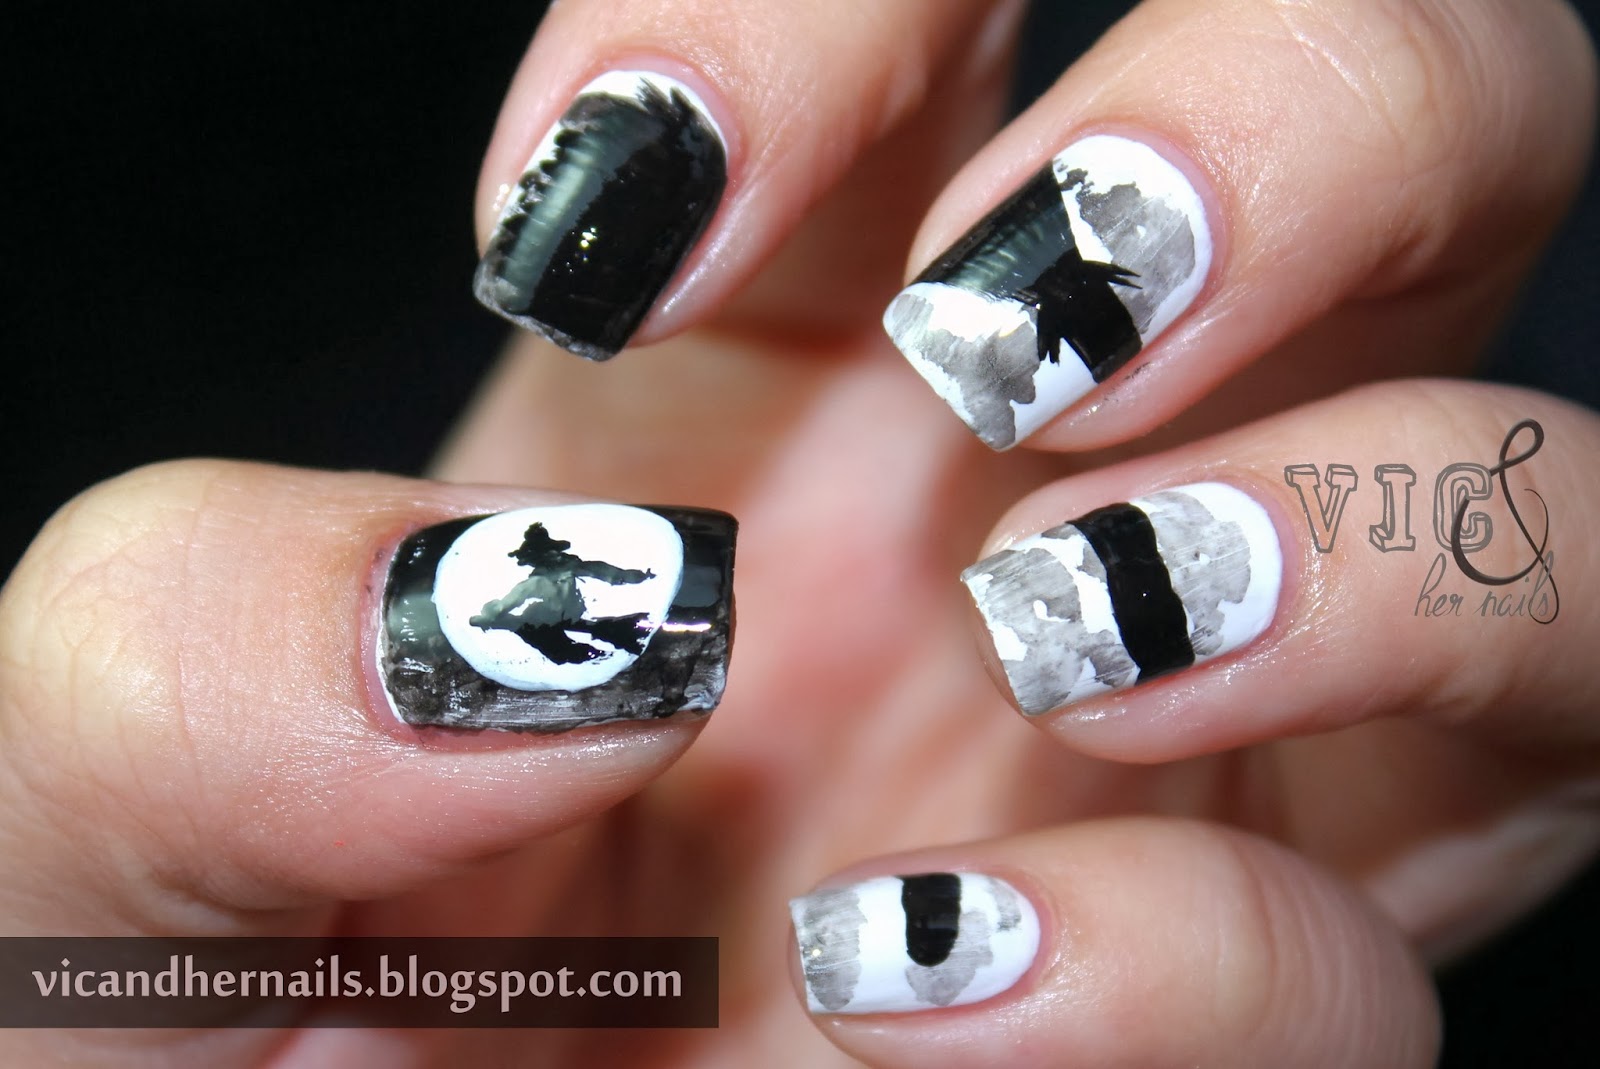 6. "2024 Halloween Nail Trends: Simple and Chic" - wide 4